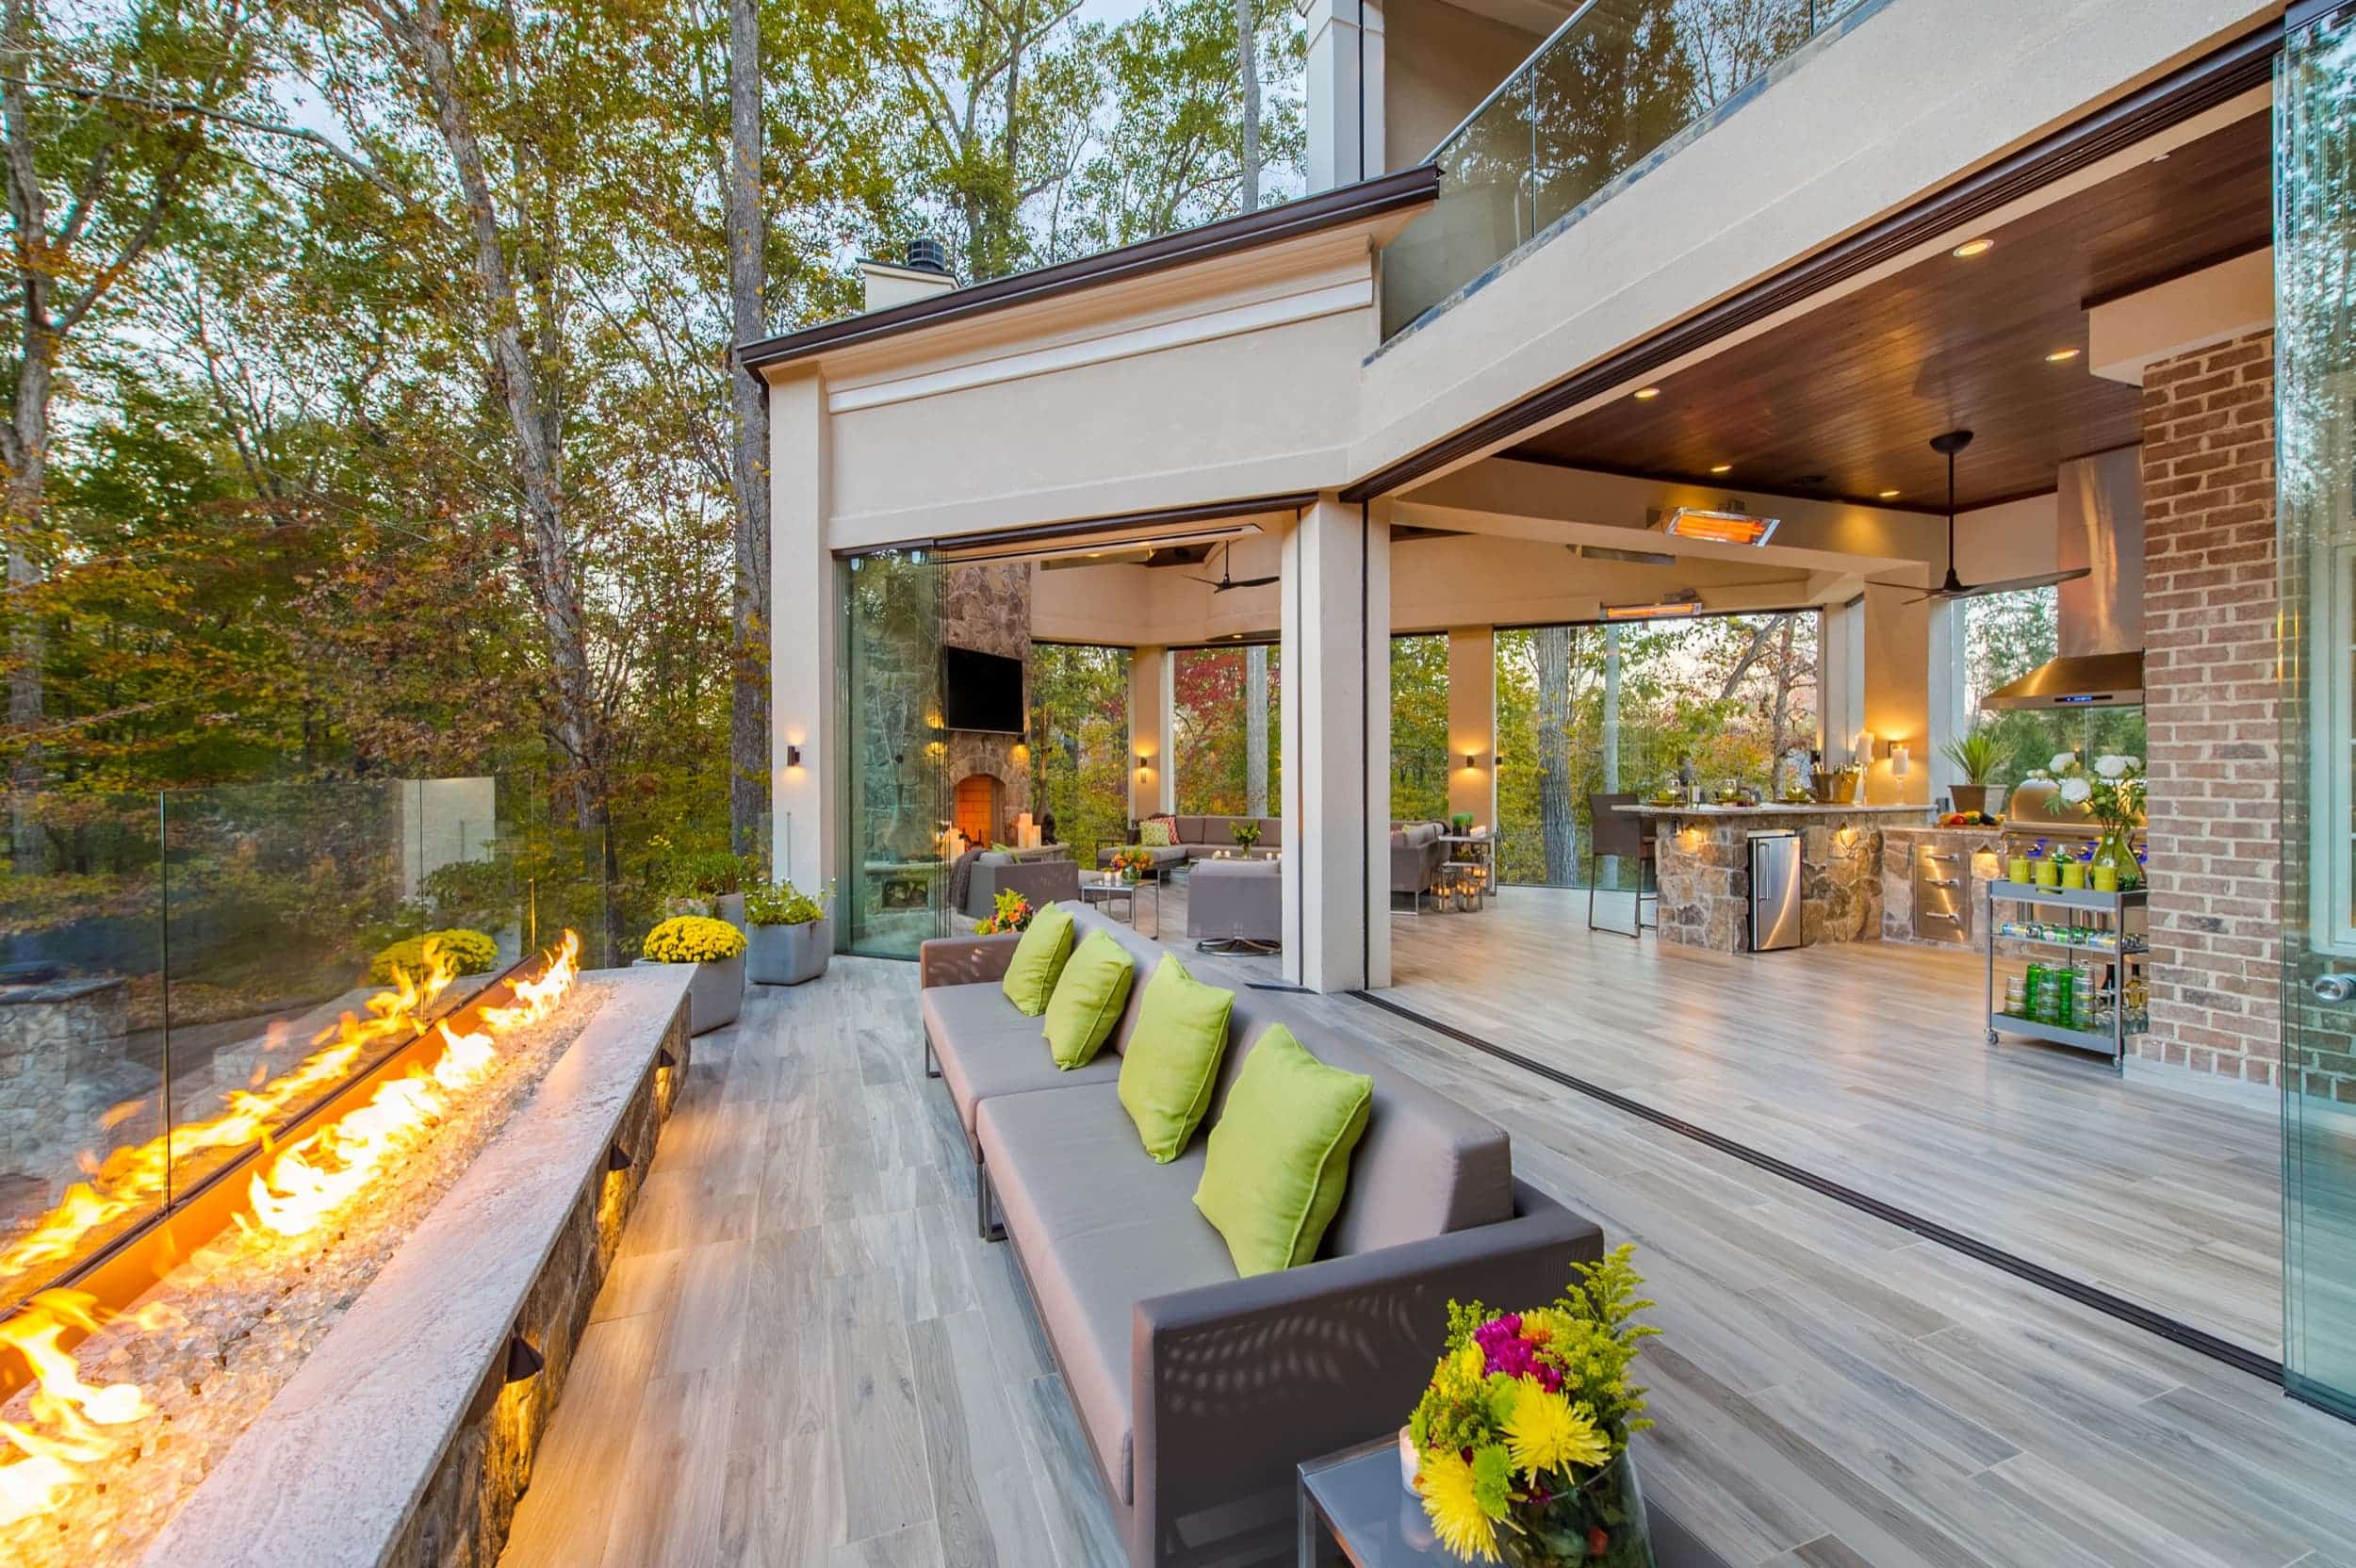 An outdoor living area with a fire pit.